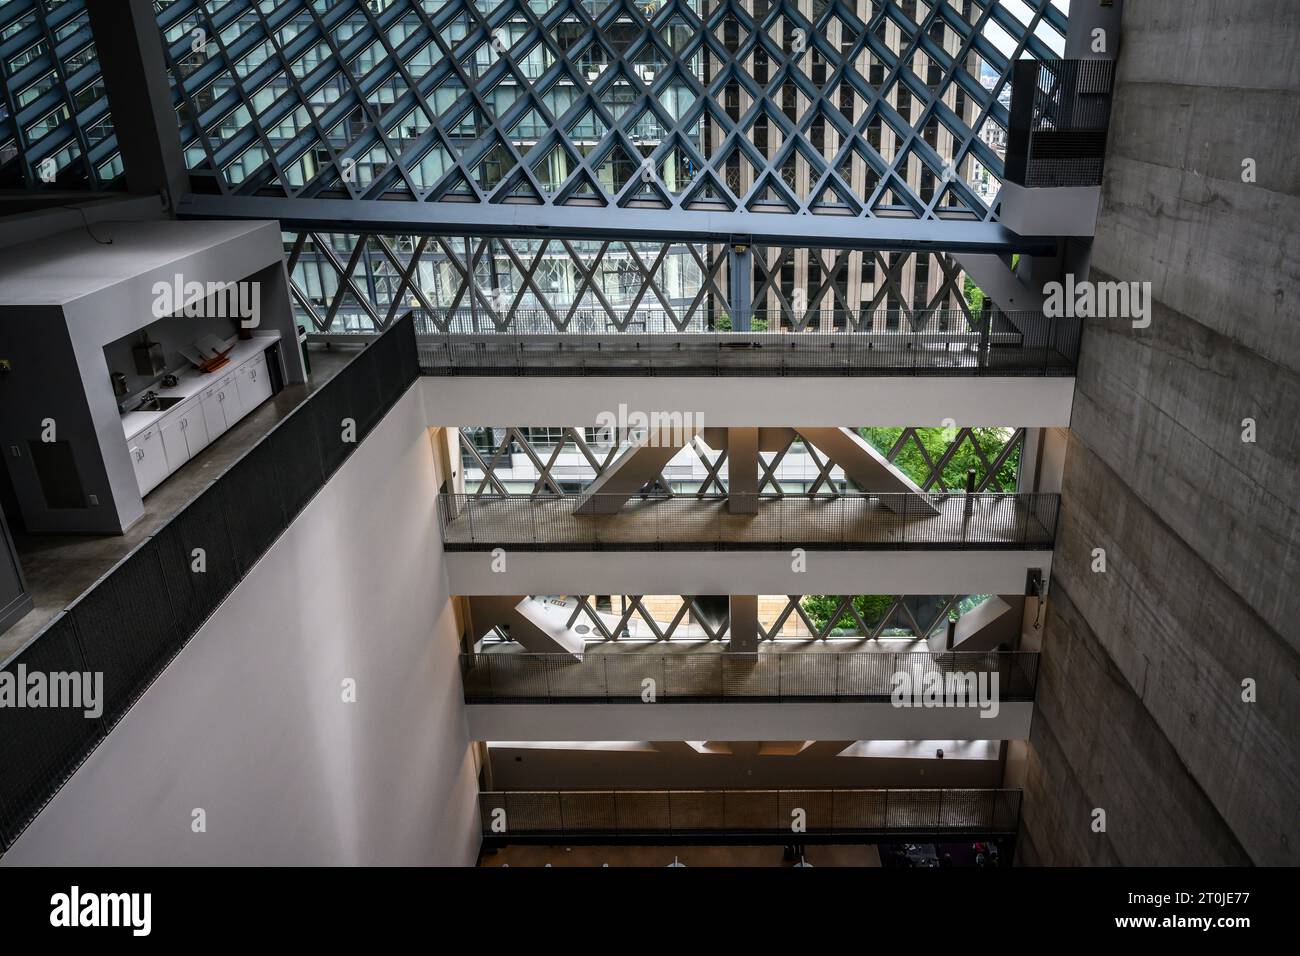 Seattle Public Library - Central Library Stock Photo - Alamy